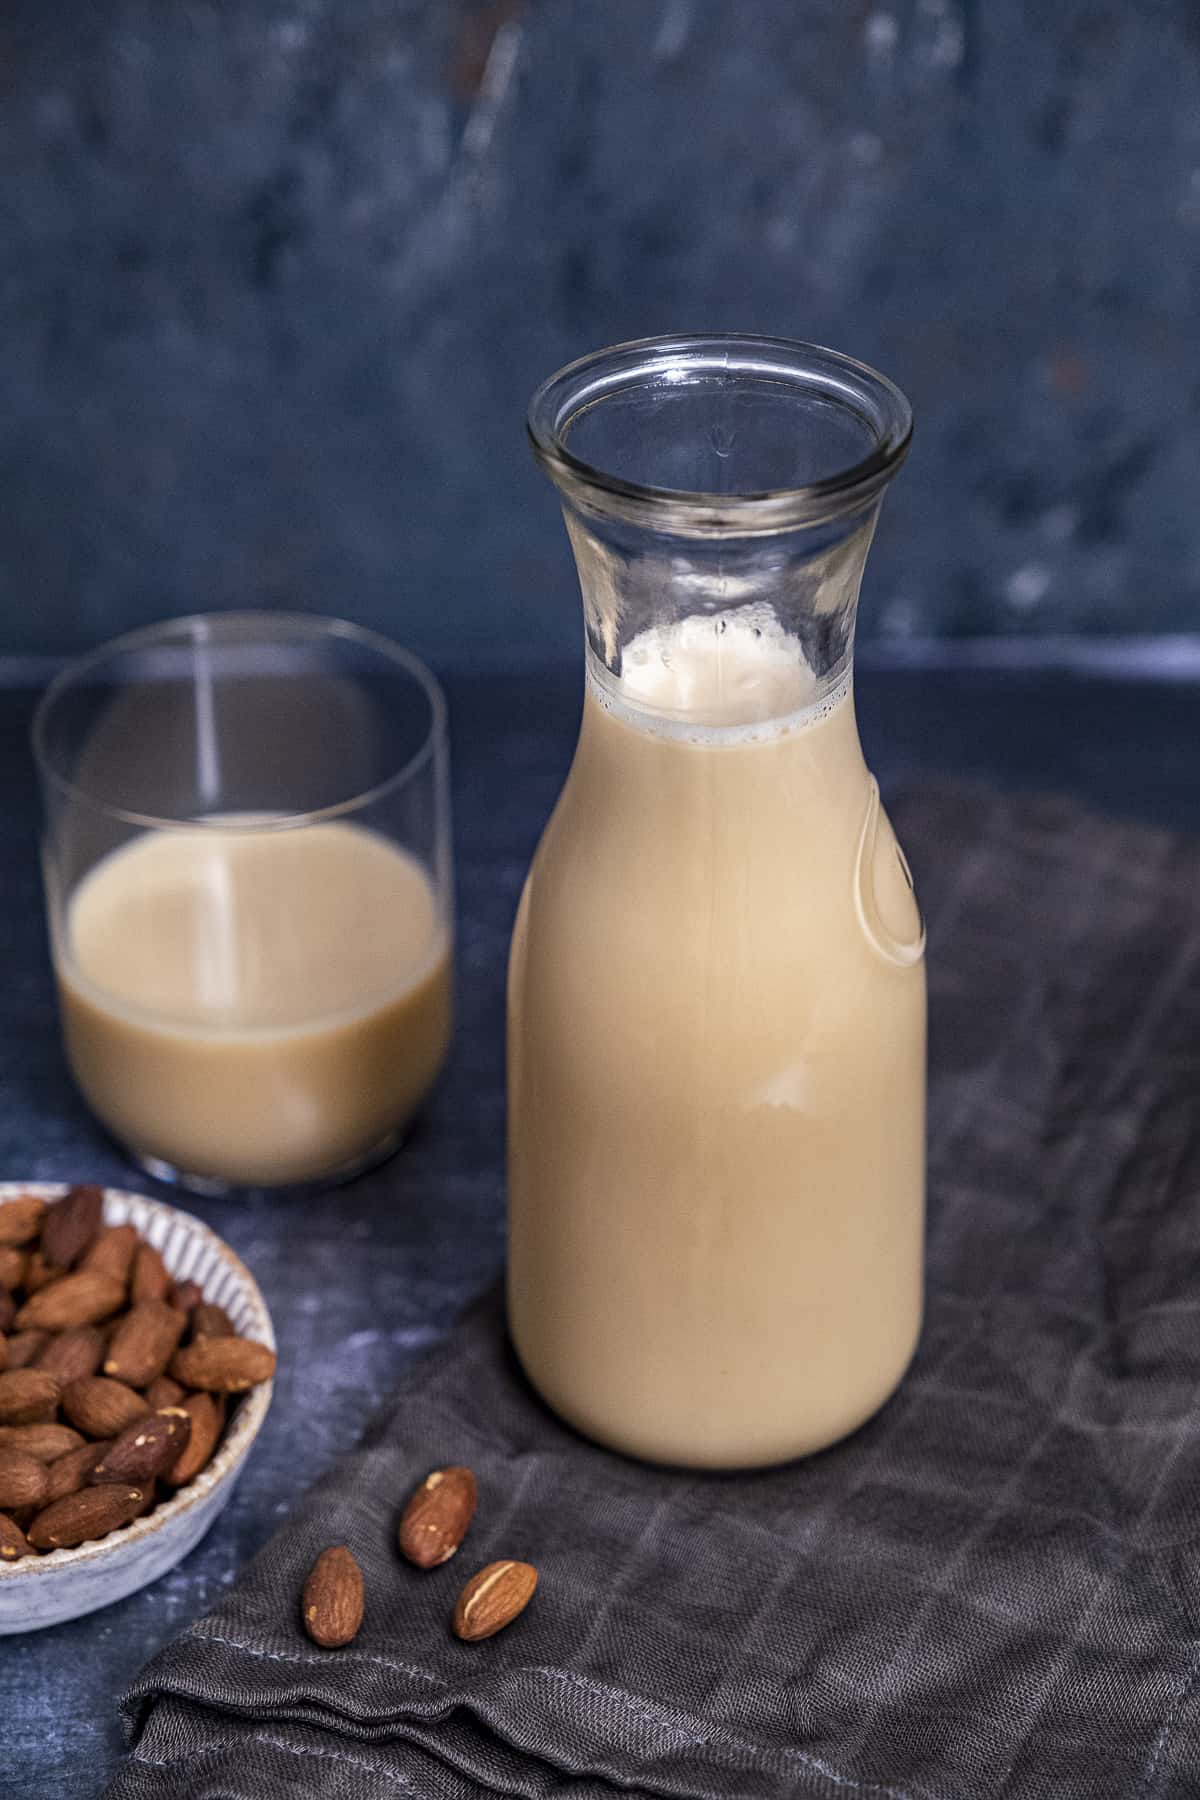 Homemade almond milk in a bottle and in a glass and roasted whole almonds on the side on a dark background.